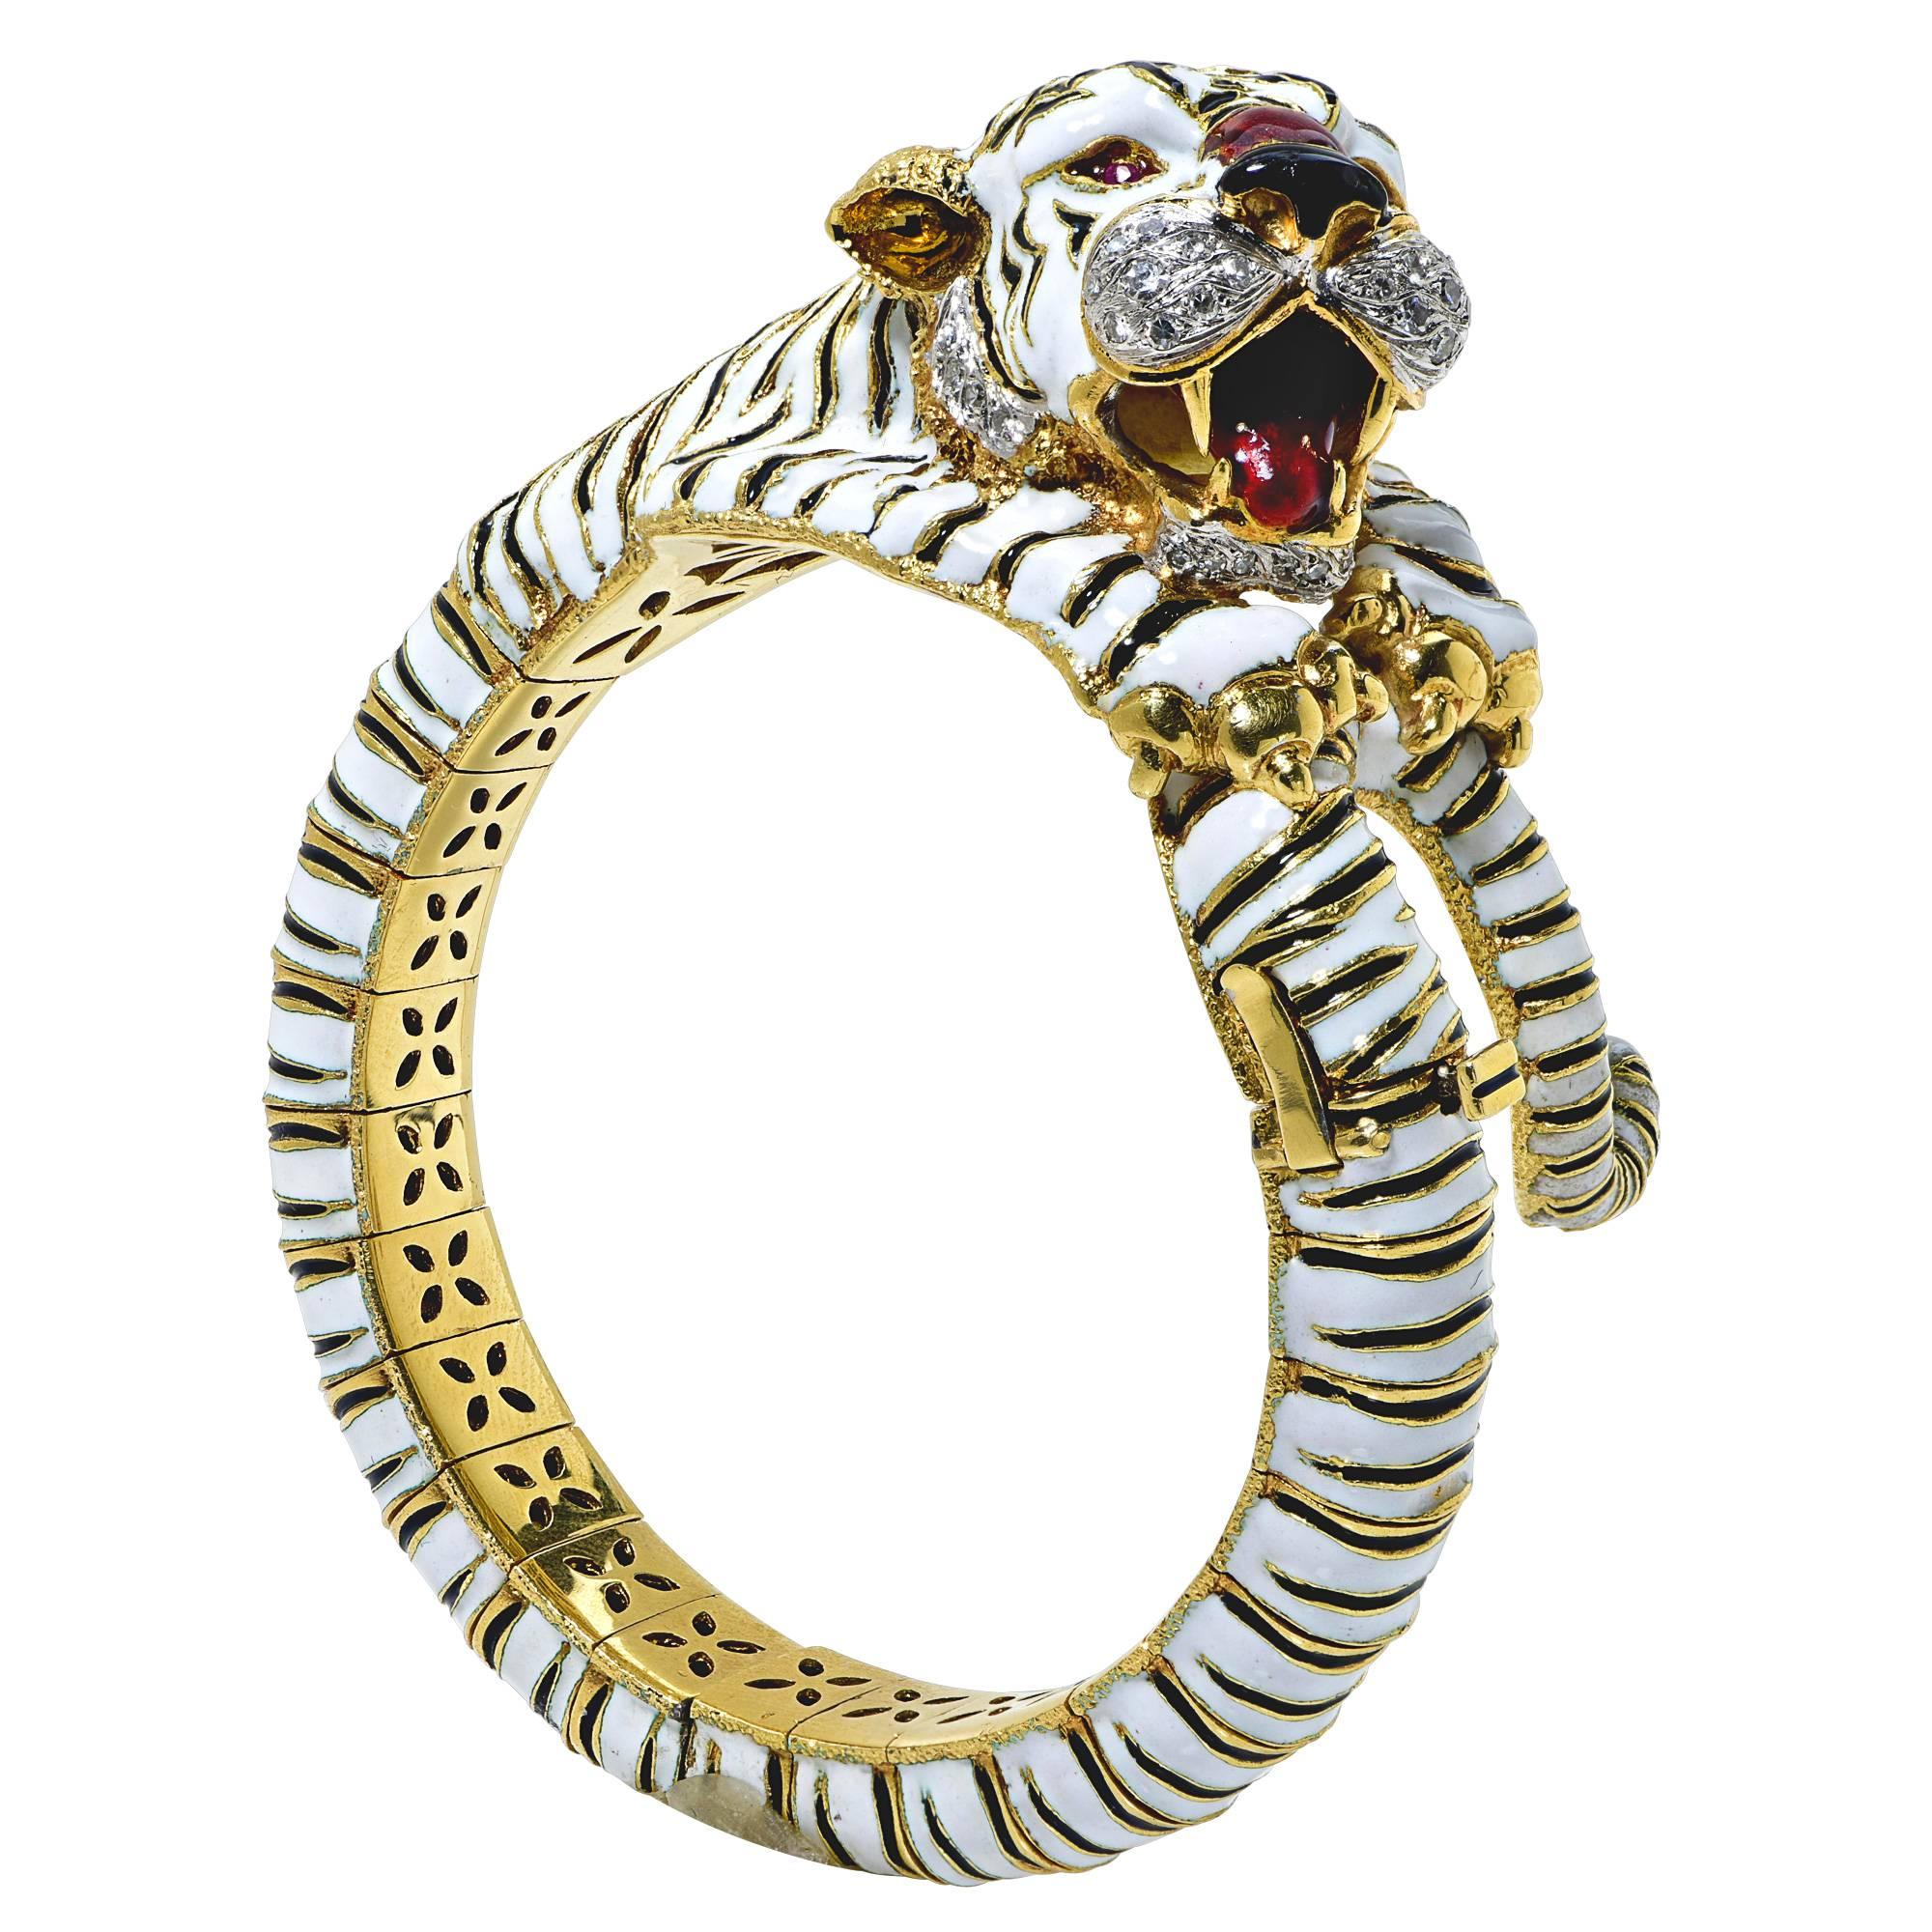 18 Karat Yellow Gold and Enamel Frascarolo Bangle Featuring 25 Round Brilliant Diamonds Weighing Approximately .30 Carats and 2 Ruby Eyes Weighing Approximately .02 Carats.

Length: 7 inch
Weight: 144.61 grams

This Bracelet is Accompanied by a